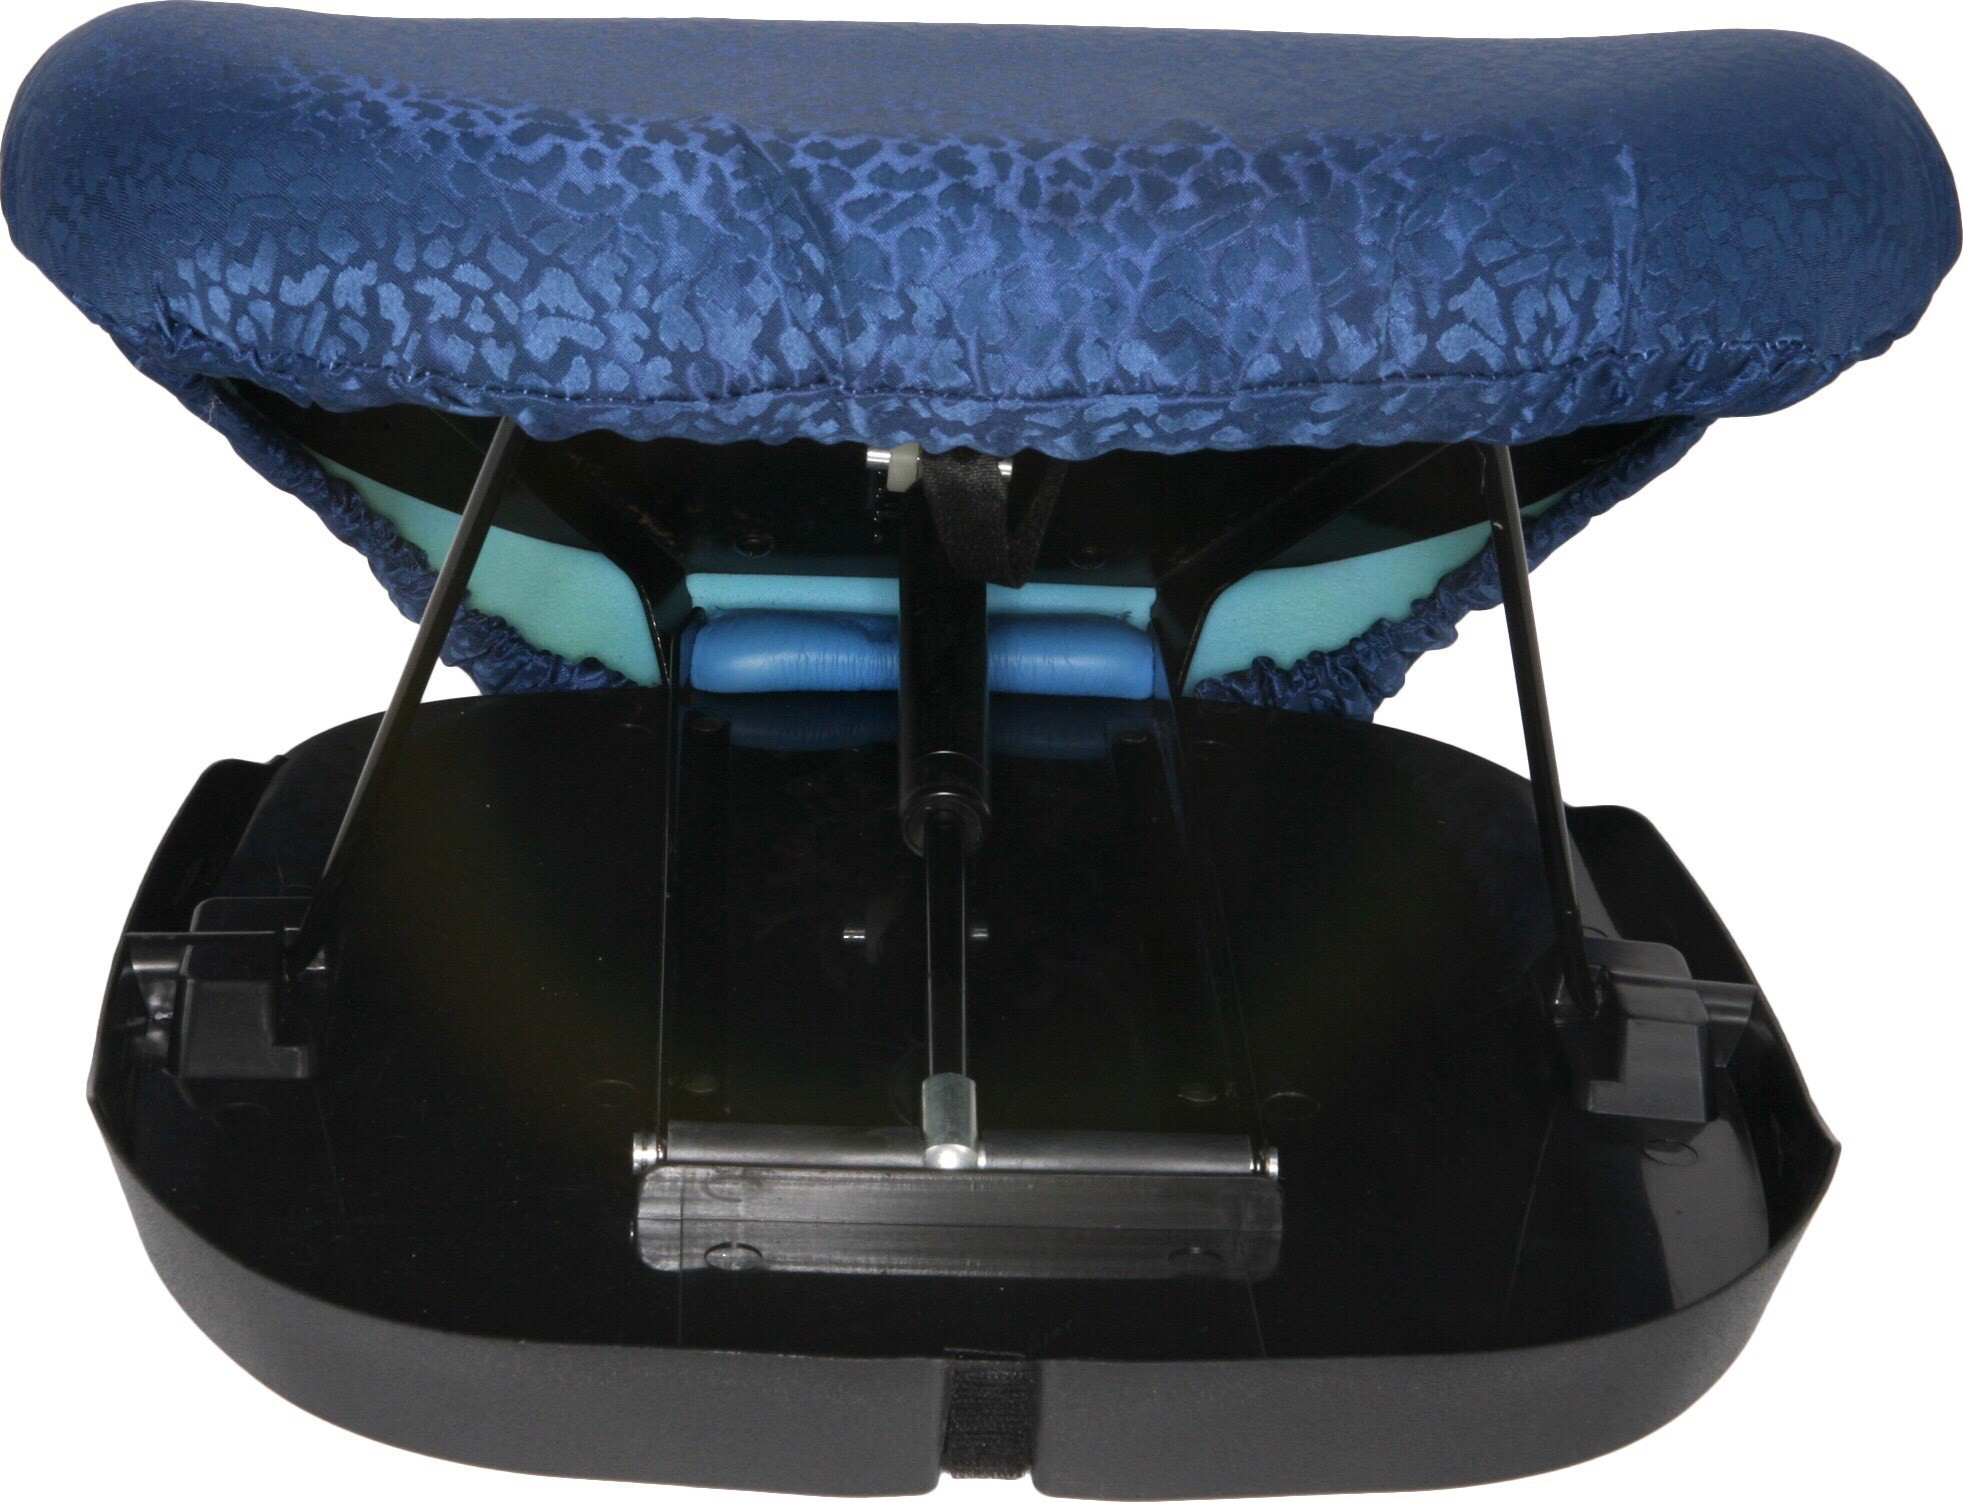 Deluxe Comfort Easy Up Lift Assist Cushioned Chair -  Supports Up To 220 Pounds - Portable Lift Chair - Elevate Your Body And  Spirits - Lift